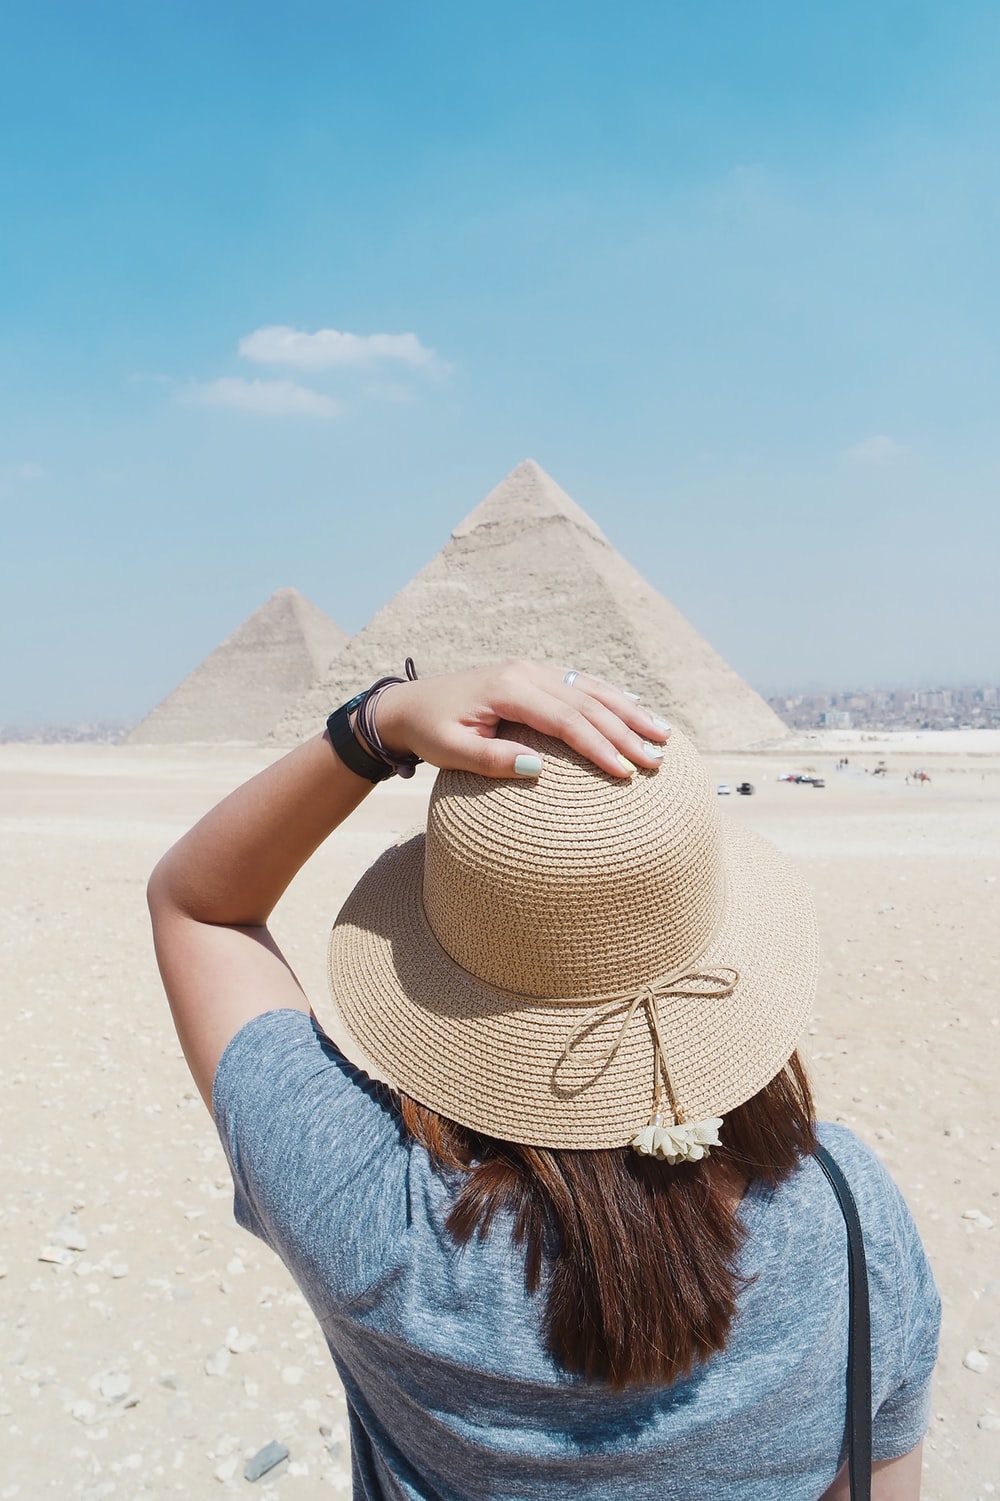 woman in blue top standing in front of Pyramid during daytime